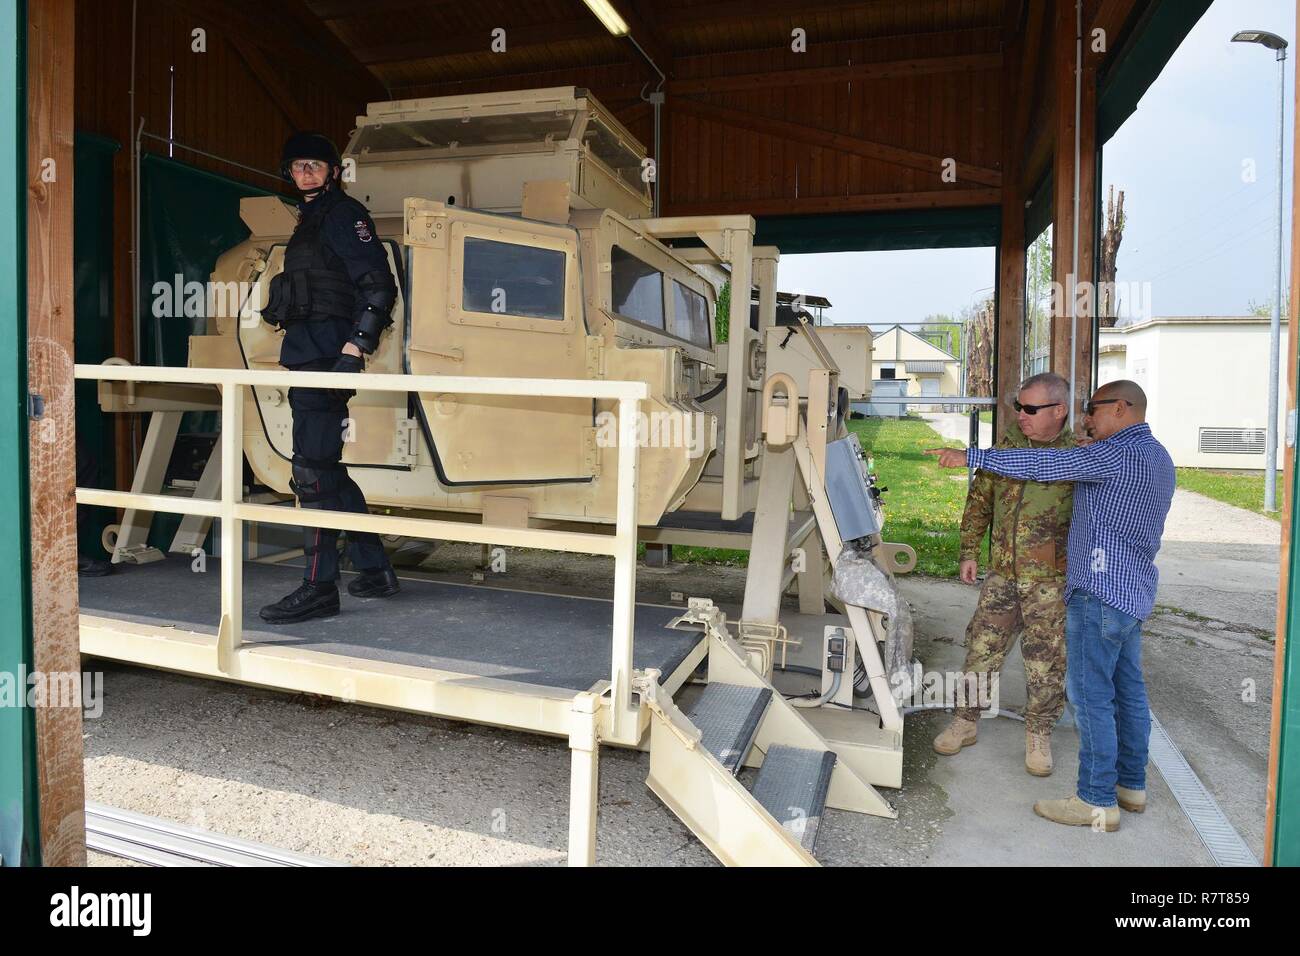 Joseph Gallegos, Training Specialist, Training Support Center Italy, shows the High Mobility Multipurpose Wheeled Vehicle (HMMWV) egress assistance trainer (HEAT), to the Sgt. Maj. Massimo Giordano Italian Army, during the training Italian  Carabinieri of the 7th Regiment Carabinieri “Laives” Bolzano and 13th Regiment Carabinieri “Friuli Venezia Giulia” Gorizia, at Caserma Ederle, April 6, 2017, Vicenza, Italy. The simulator allows soldiers to practice exit from vehicles, skills and engage in realistic scenarios. Carabinieri use U.S. Army RTSD South equipment to enhance bilateral relations and Stock Photo